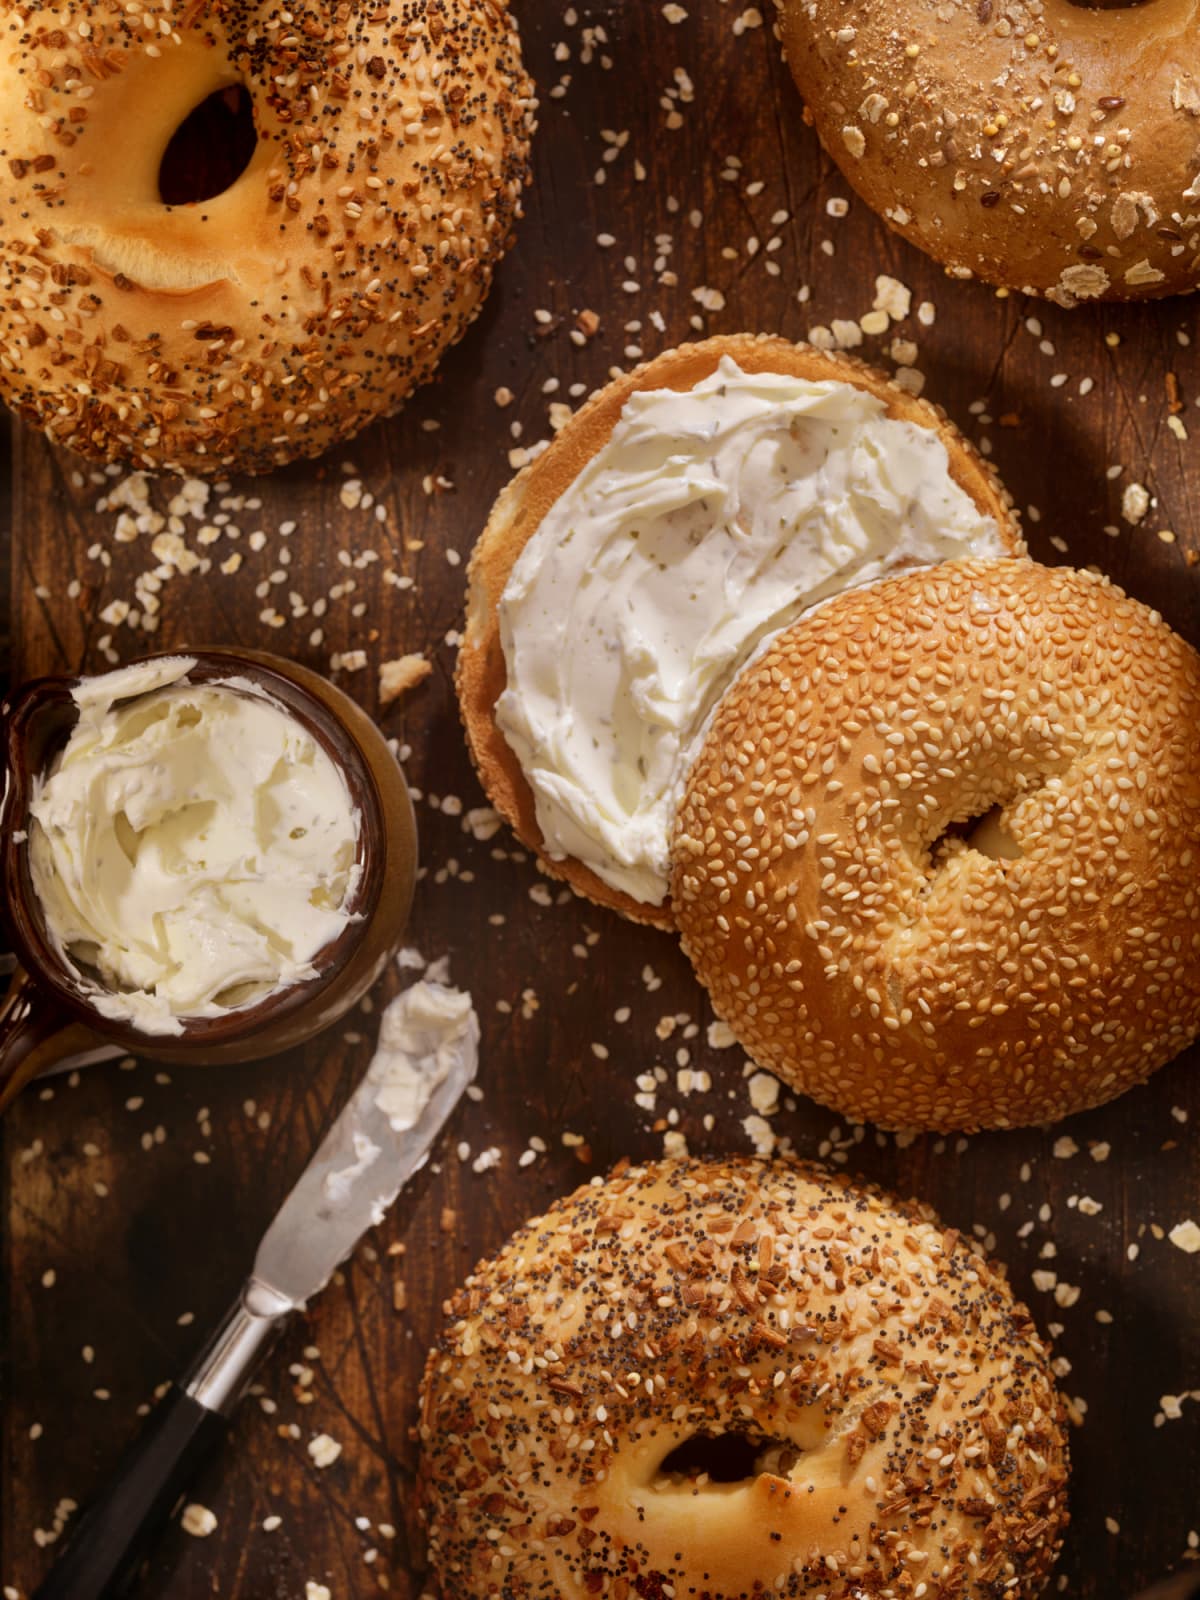 Toasted bagels with cream cheese and a knife on wooden surface